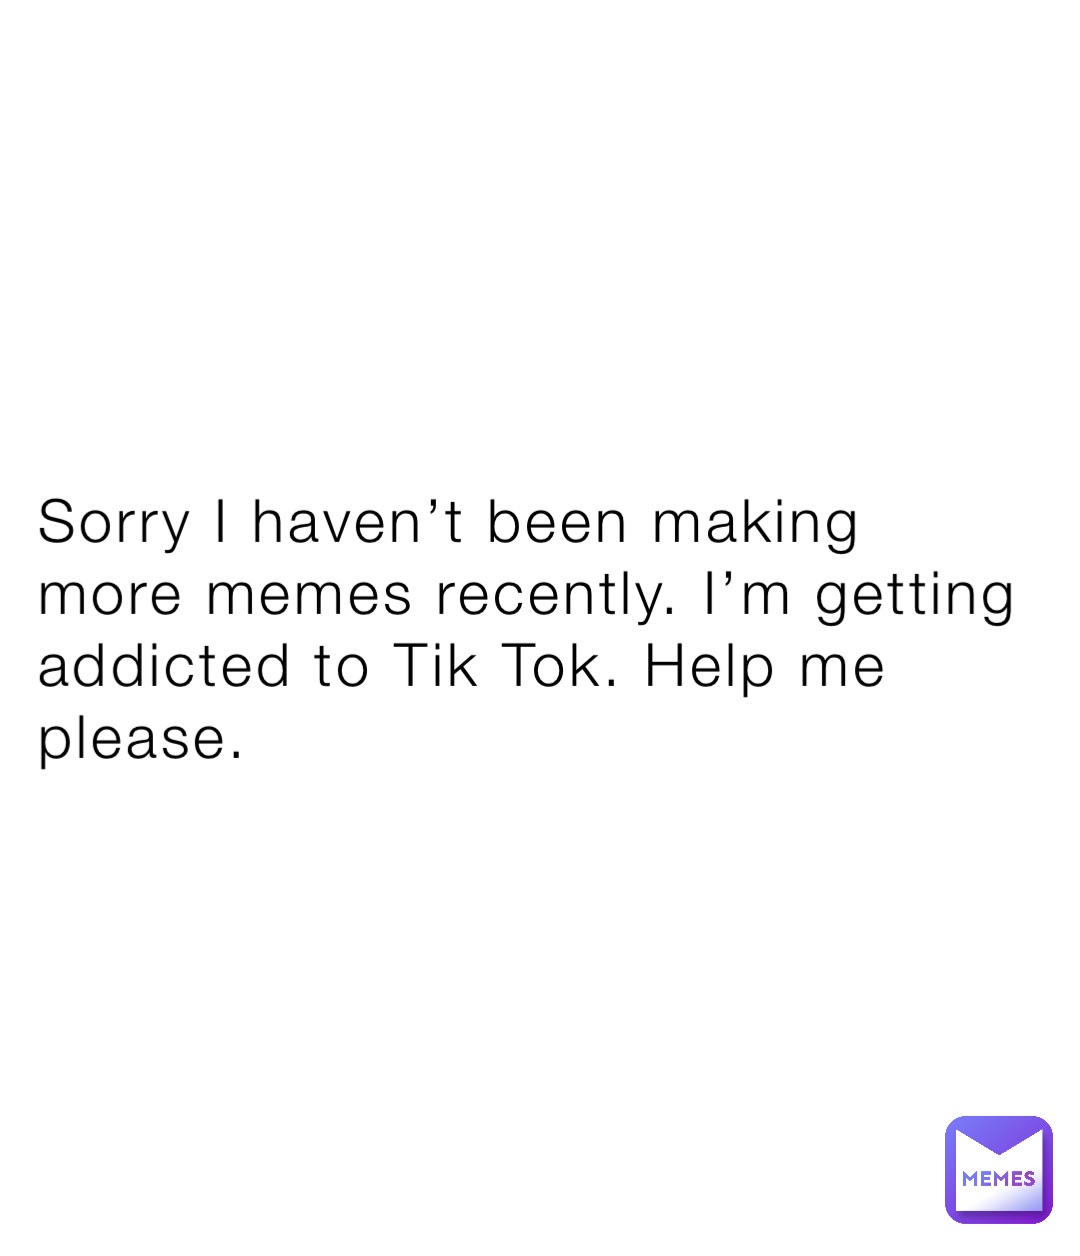 Sorry I haven’t been making more memes recently. I’m getting addicted to Tik Tok. Help me please.